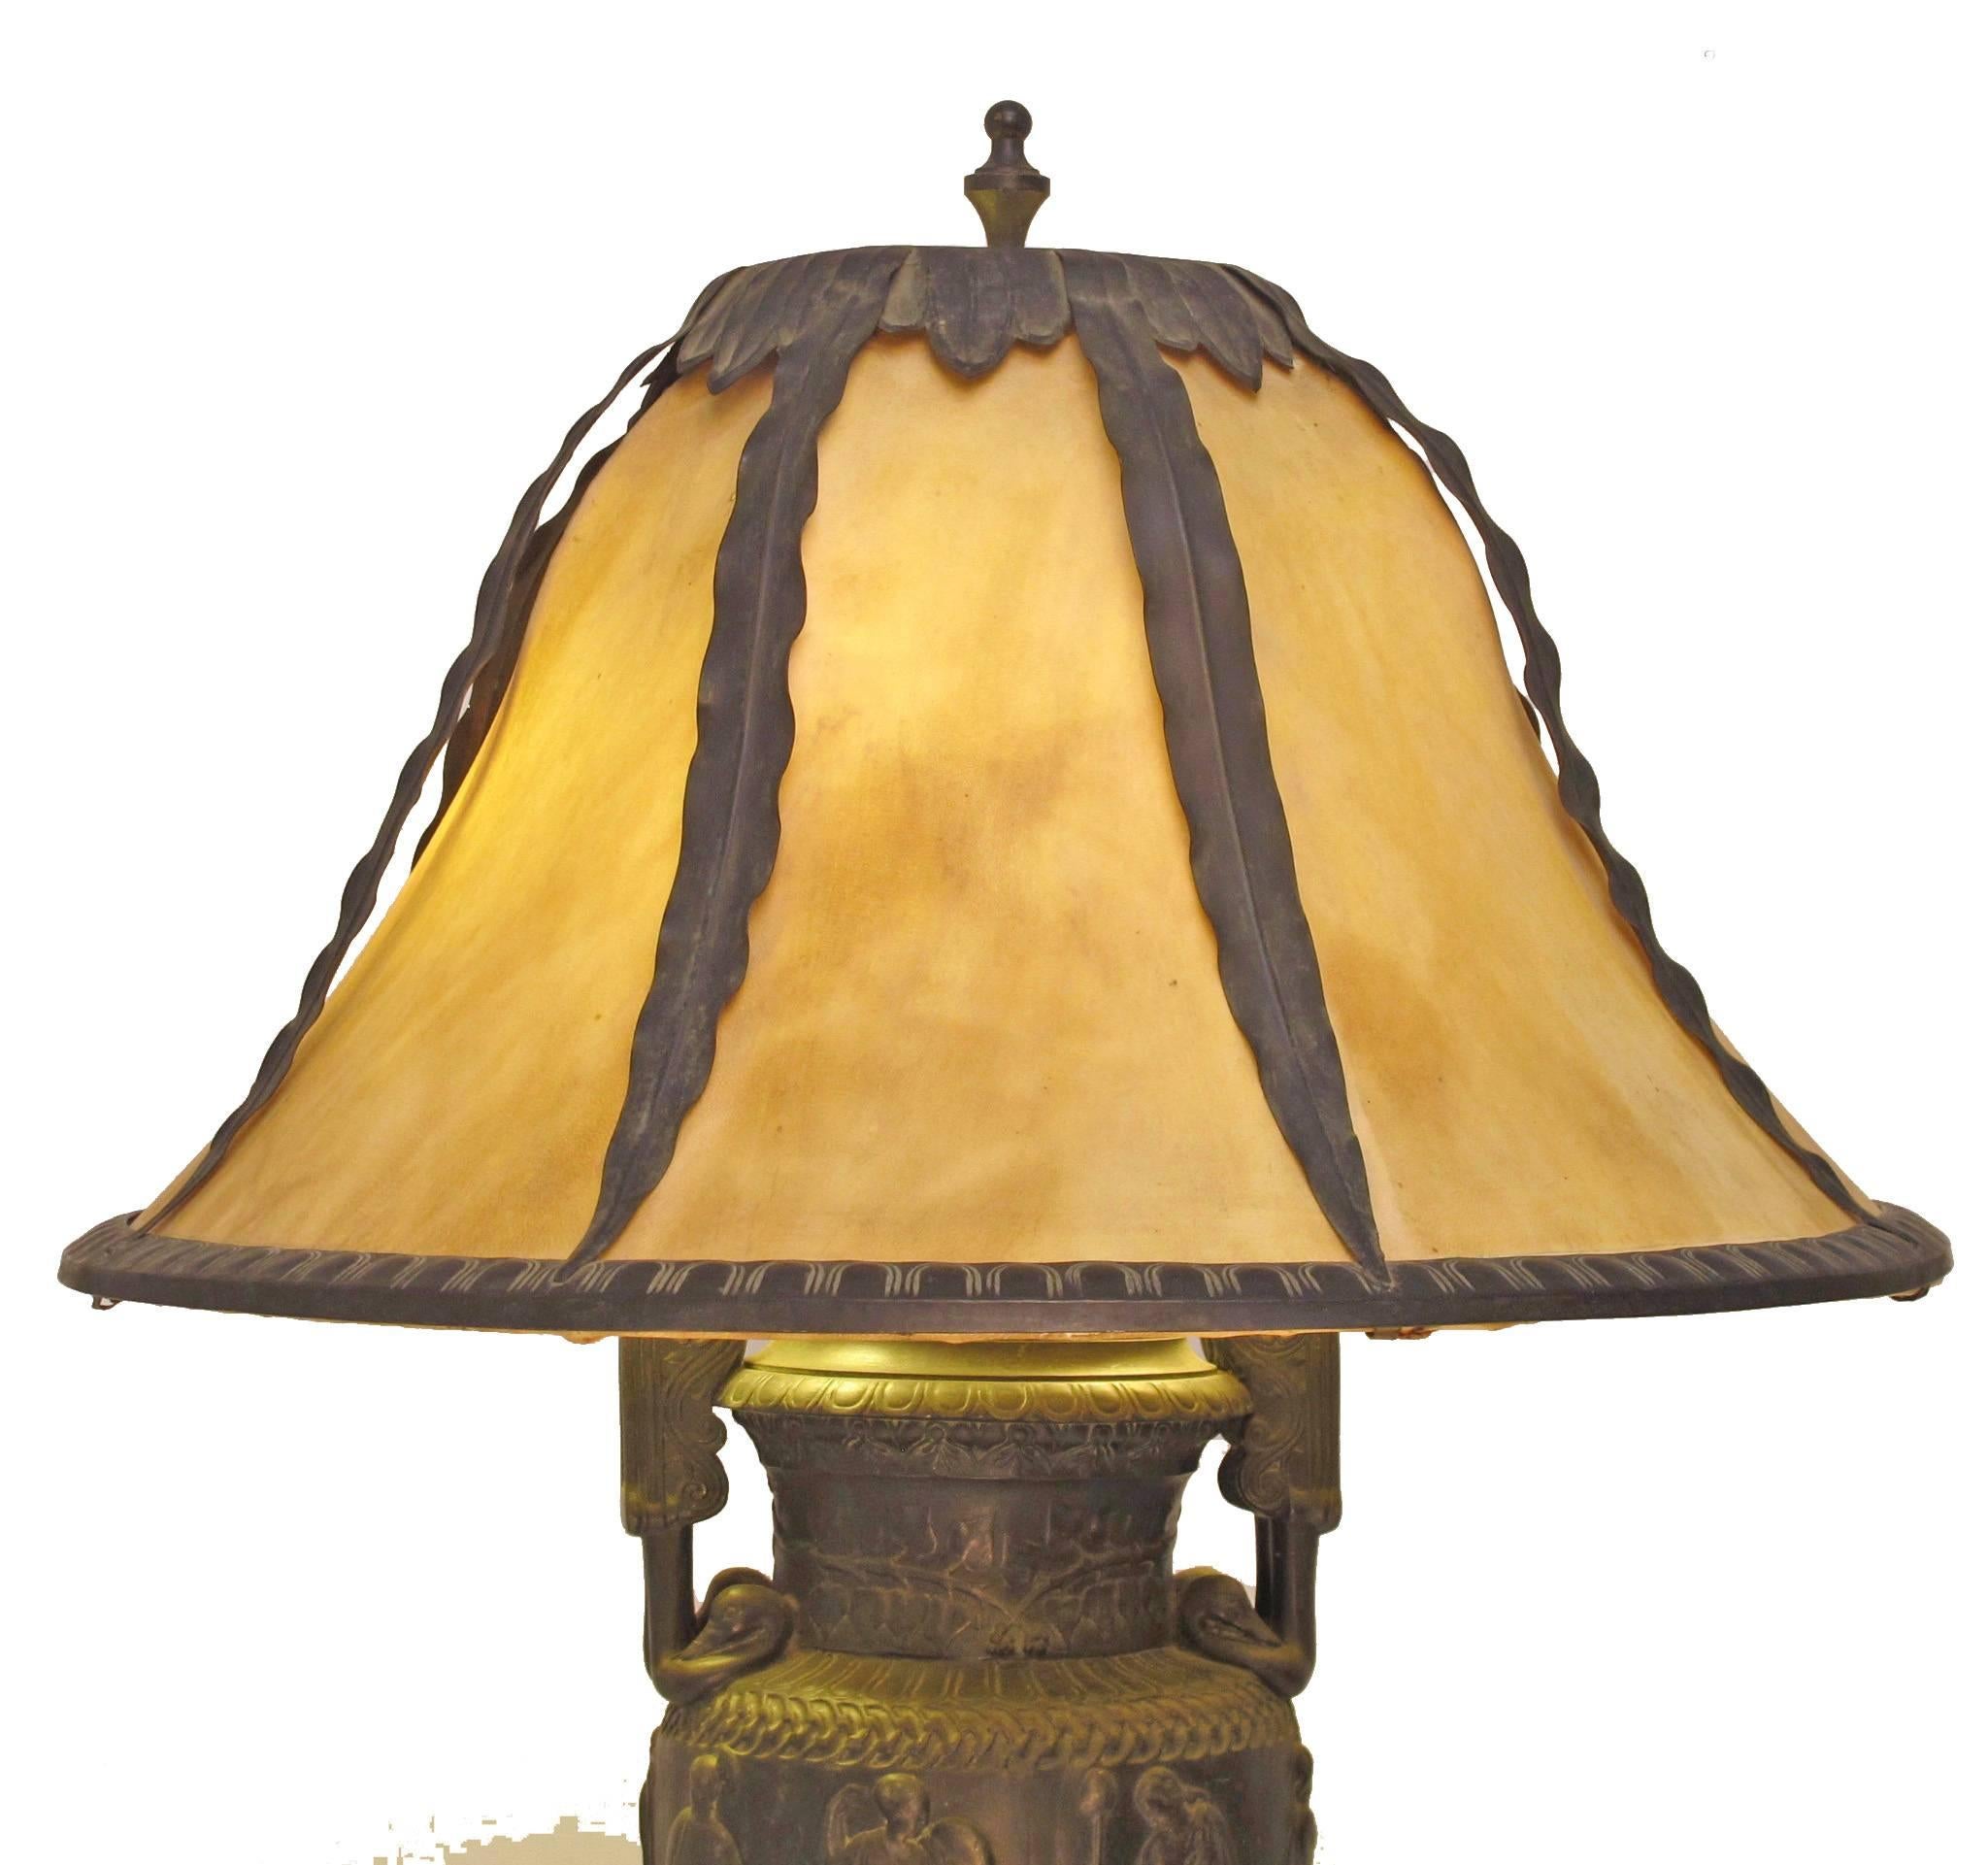 Neoclassical Revival Neoclassical Urn Table Lamp For Sale